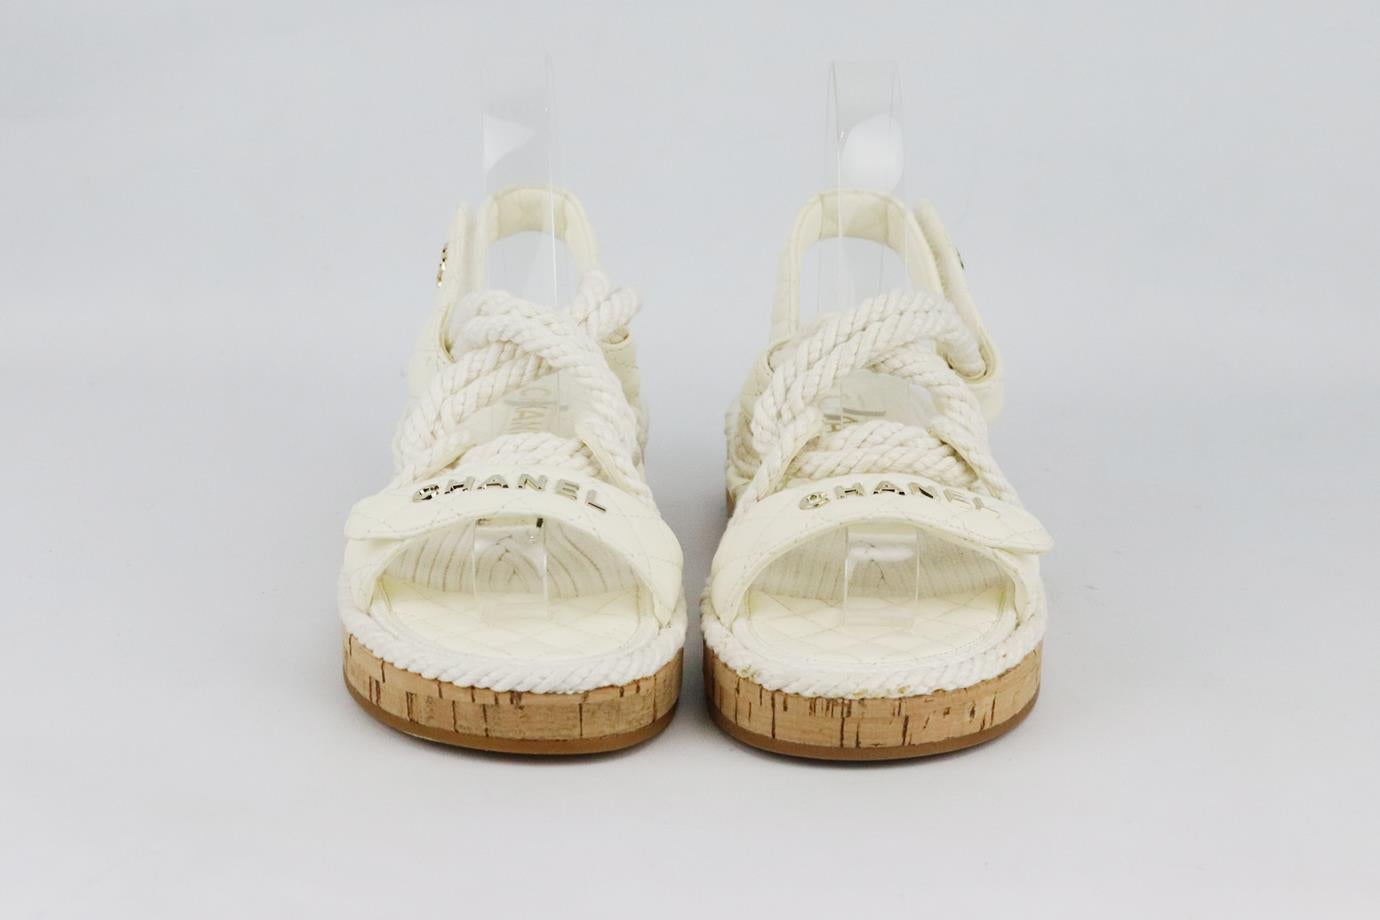 Chanel 2021 CC detailed rope and quilted leather sandals. Made from ivory quilted leather and rope with gold-tone CC and logo detail and cook soles. Ivory. Fastening at side. Does not come with box or dustbag. Size: EU 38 (UK 5, US 8). Insole: 9.8